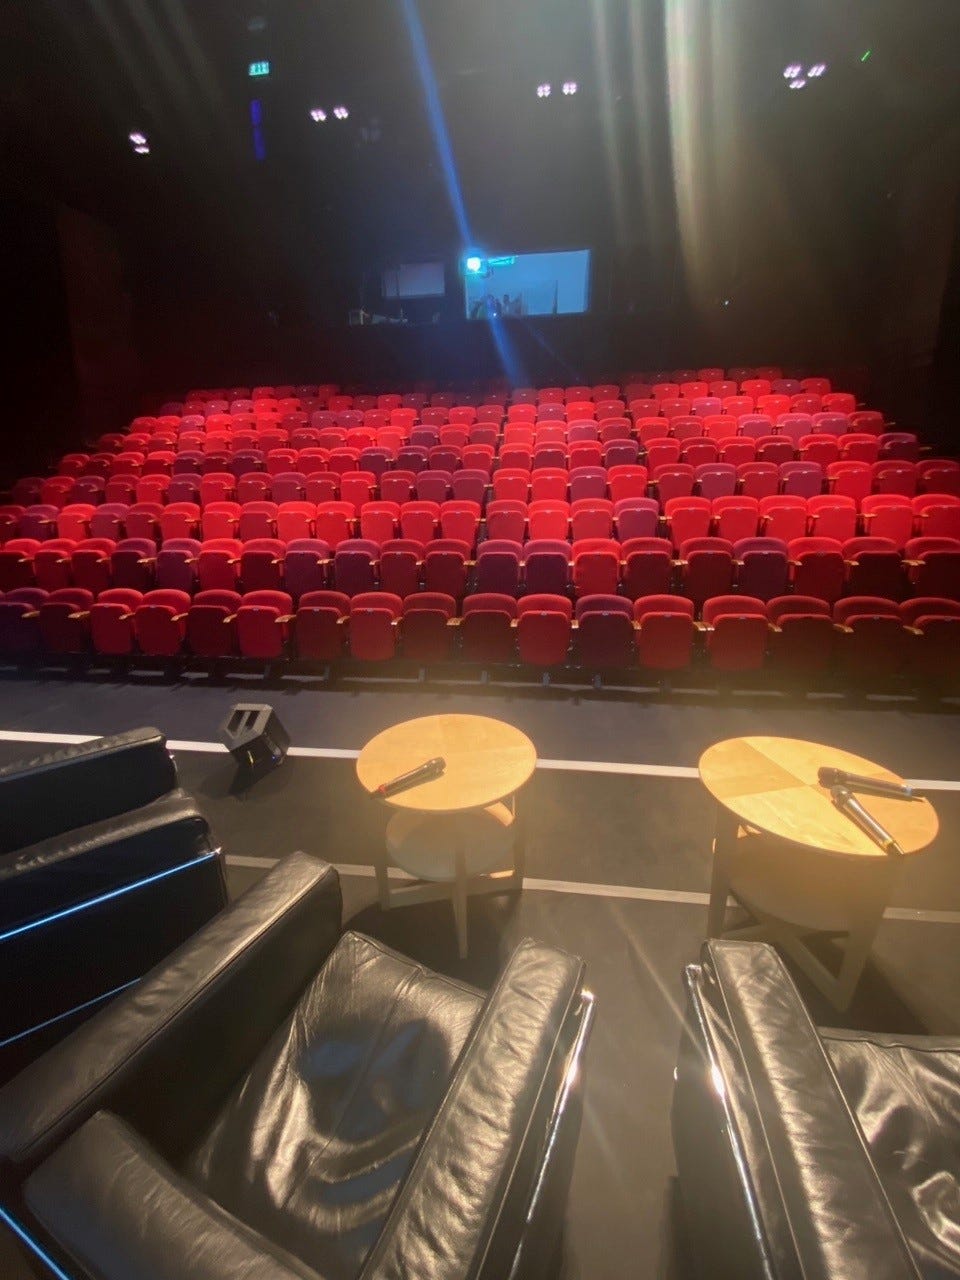 An empty theatre. Rows of red seats waiting to be folded down and sat on. Two small round tables on the stage with microphones on them and black chairs. The stage is set.